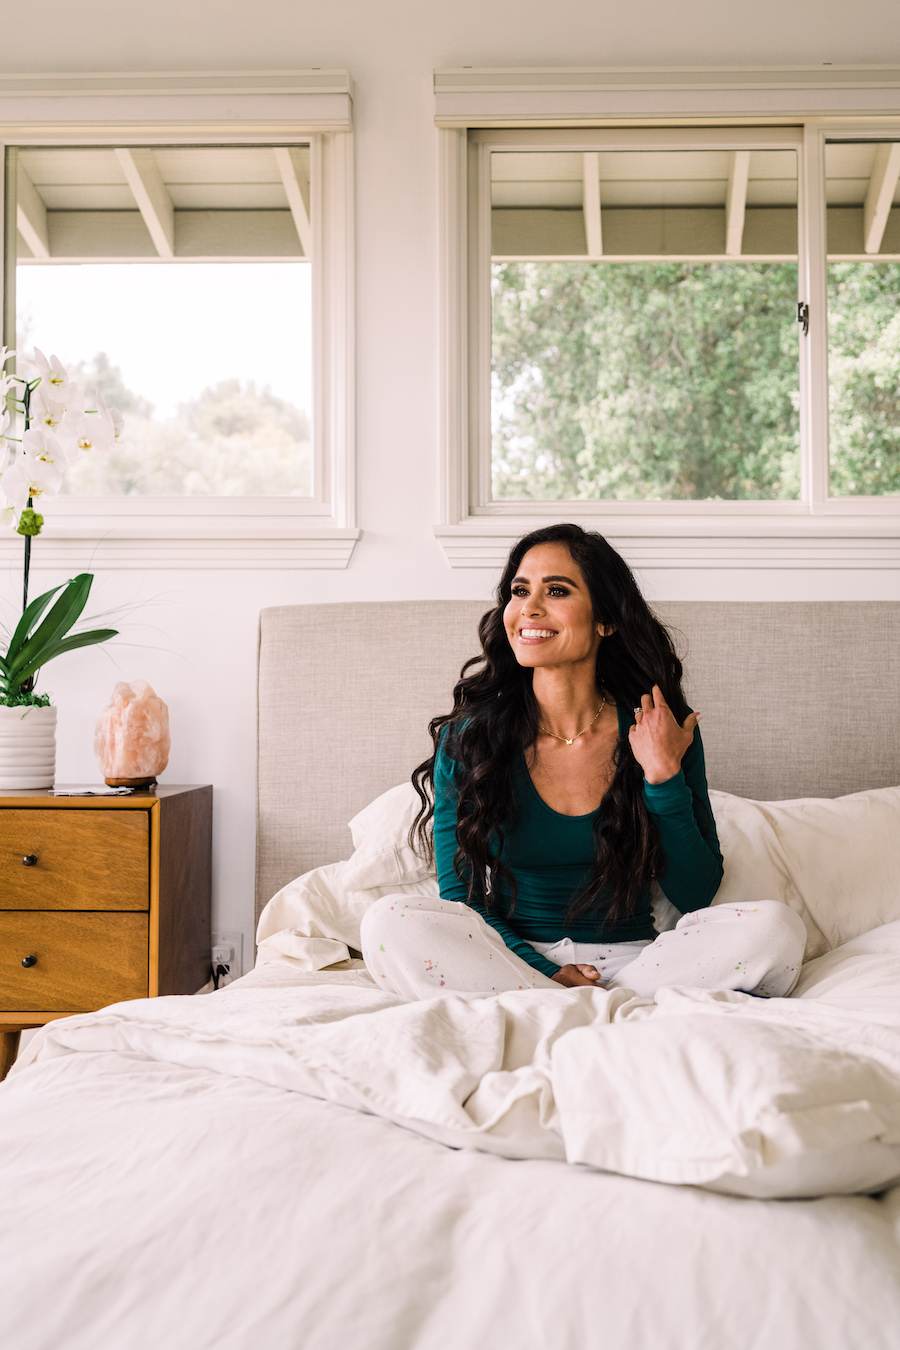 Kimberly Snyder's morning routine, bed, bedroom, relaxing, rest